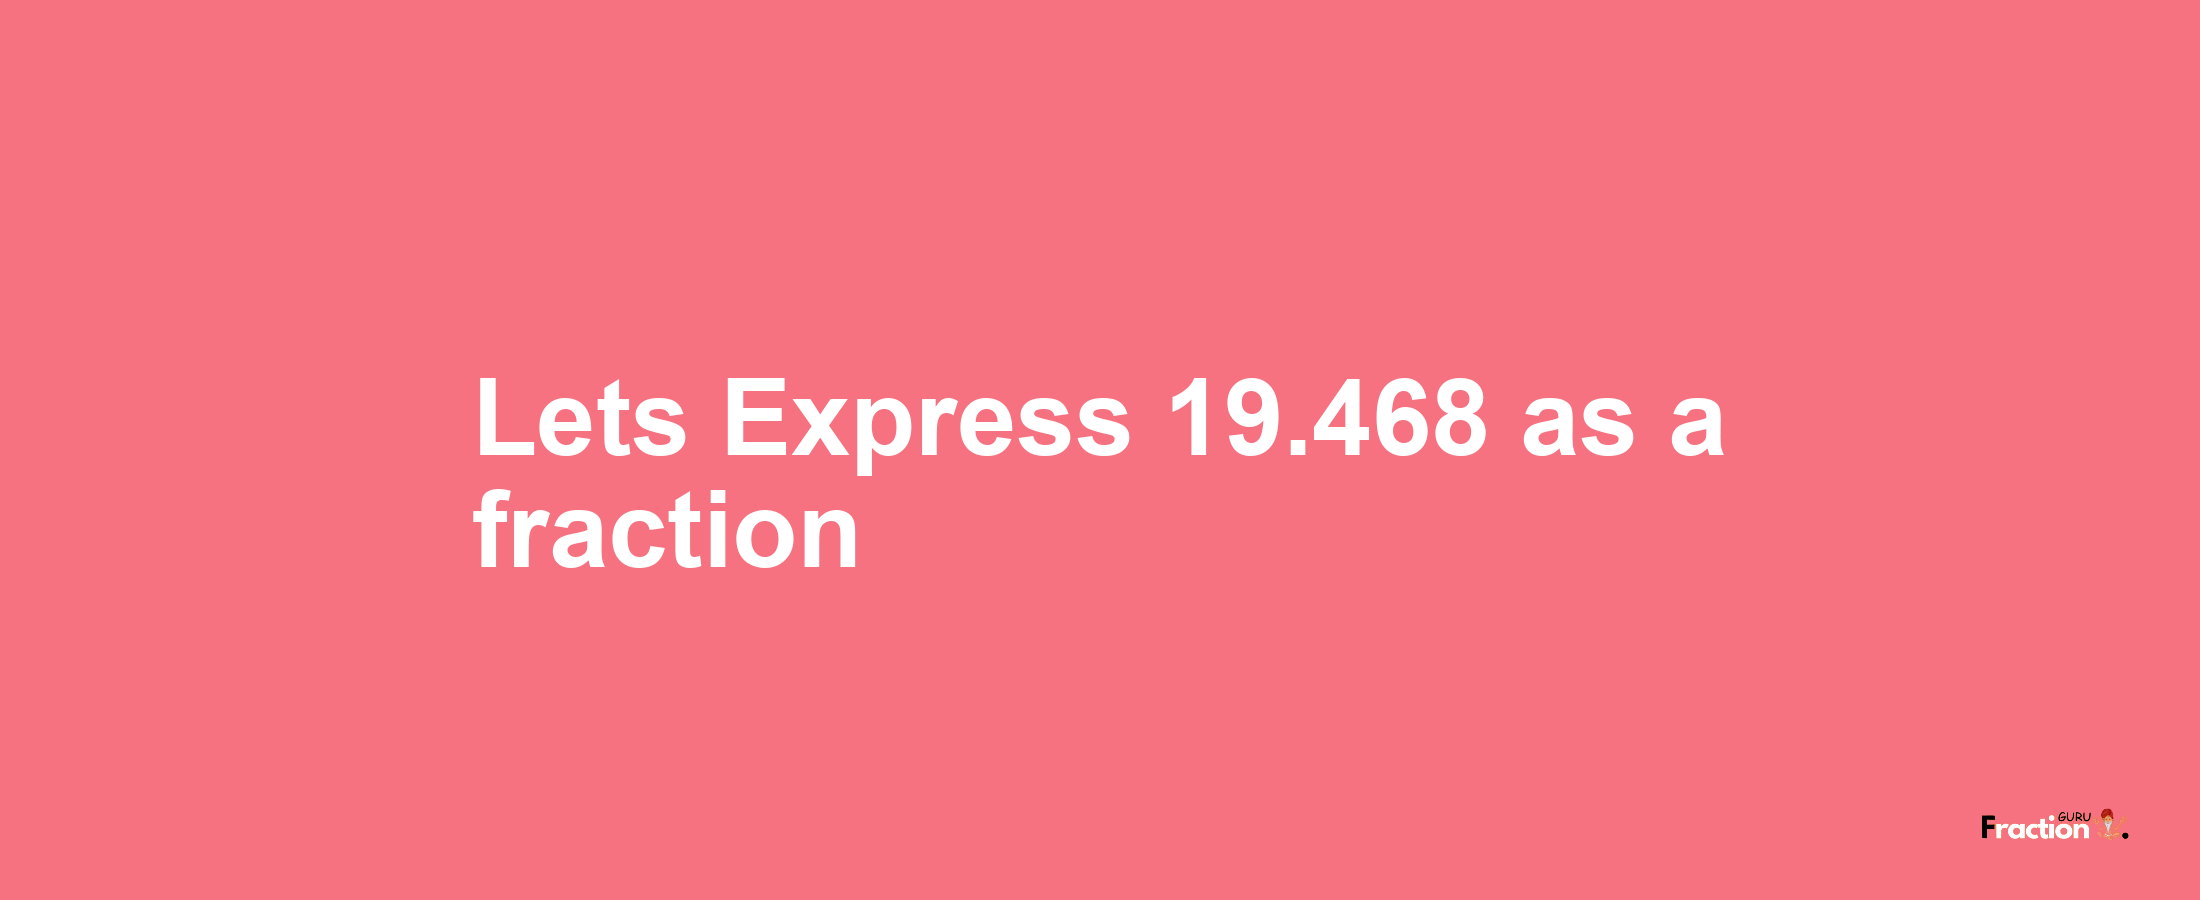 Lets Express 19.468 as afraction